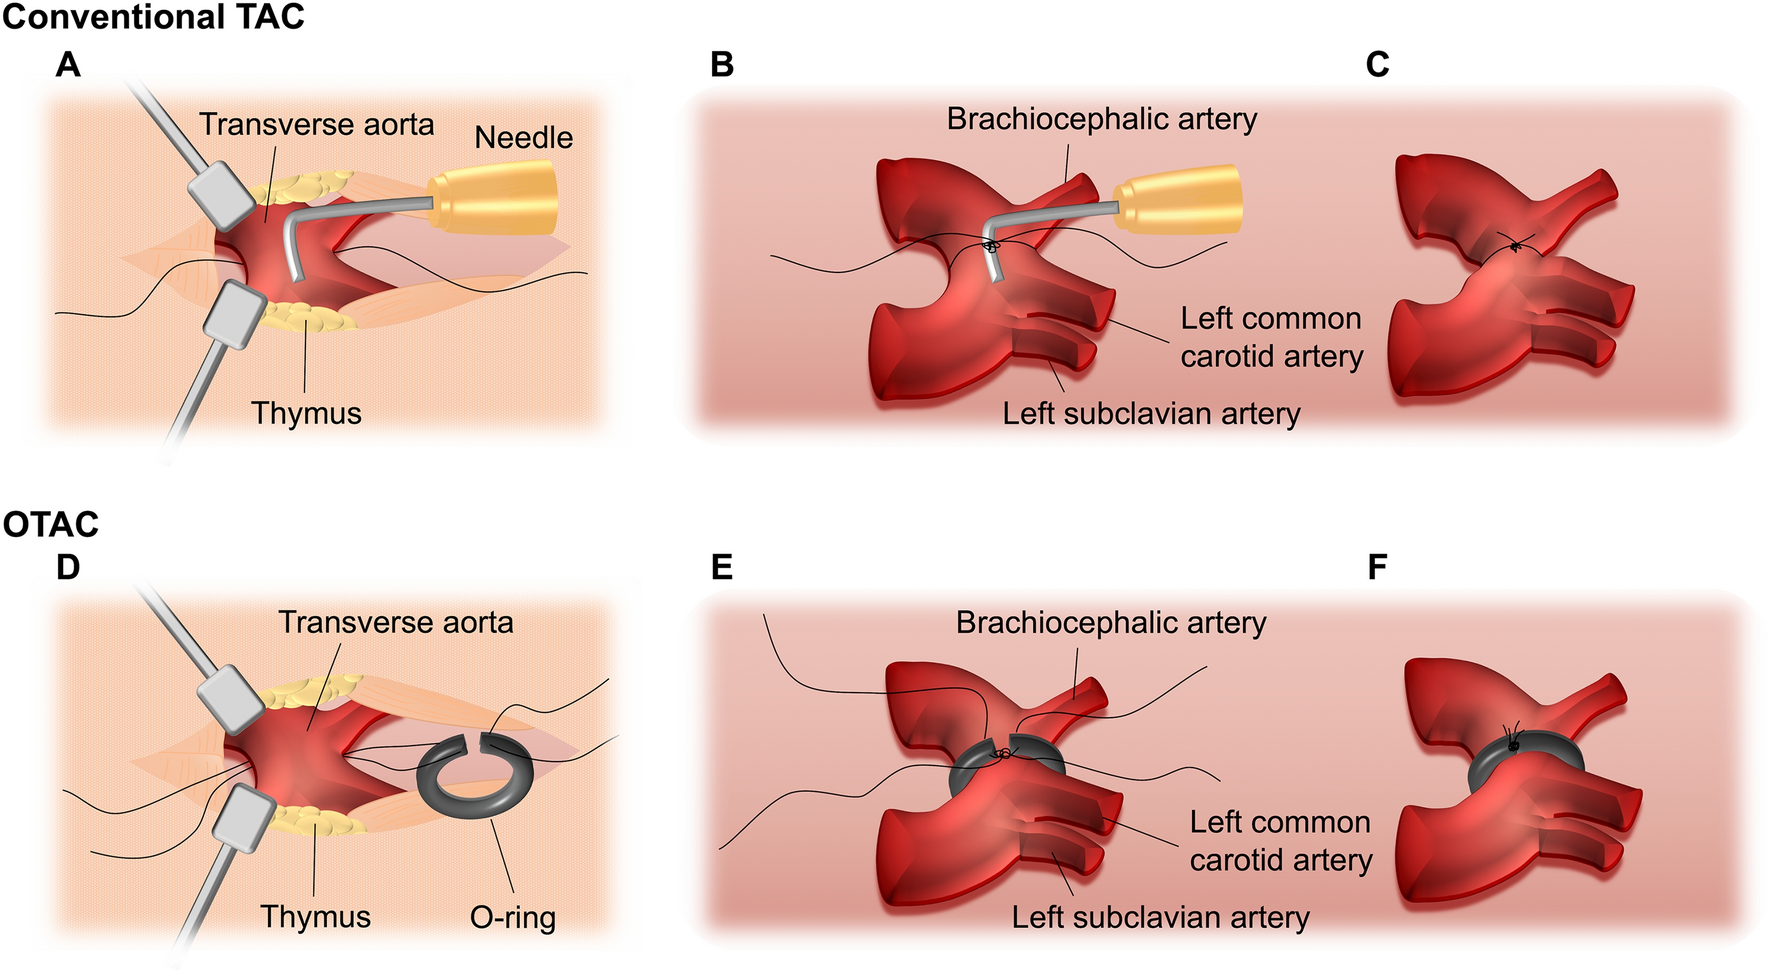 O-ring-induced transverse aortic constriction (OTAC) is a new simple method  to develop cardiac hypertrophy and heart failure in mice